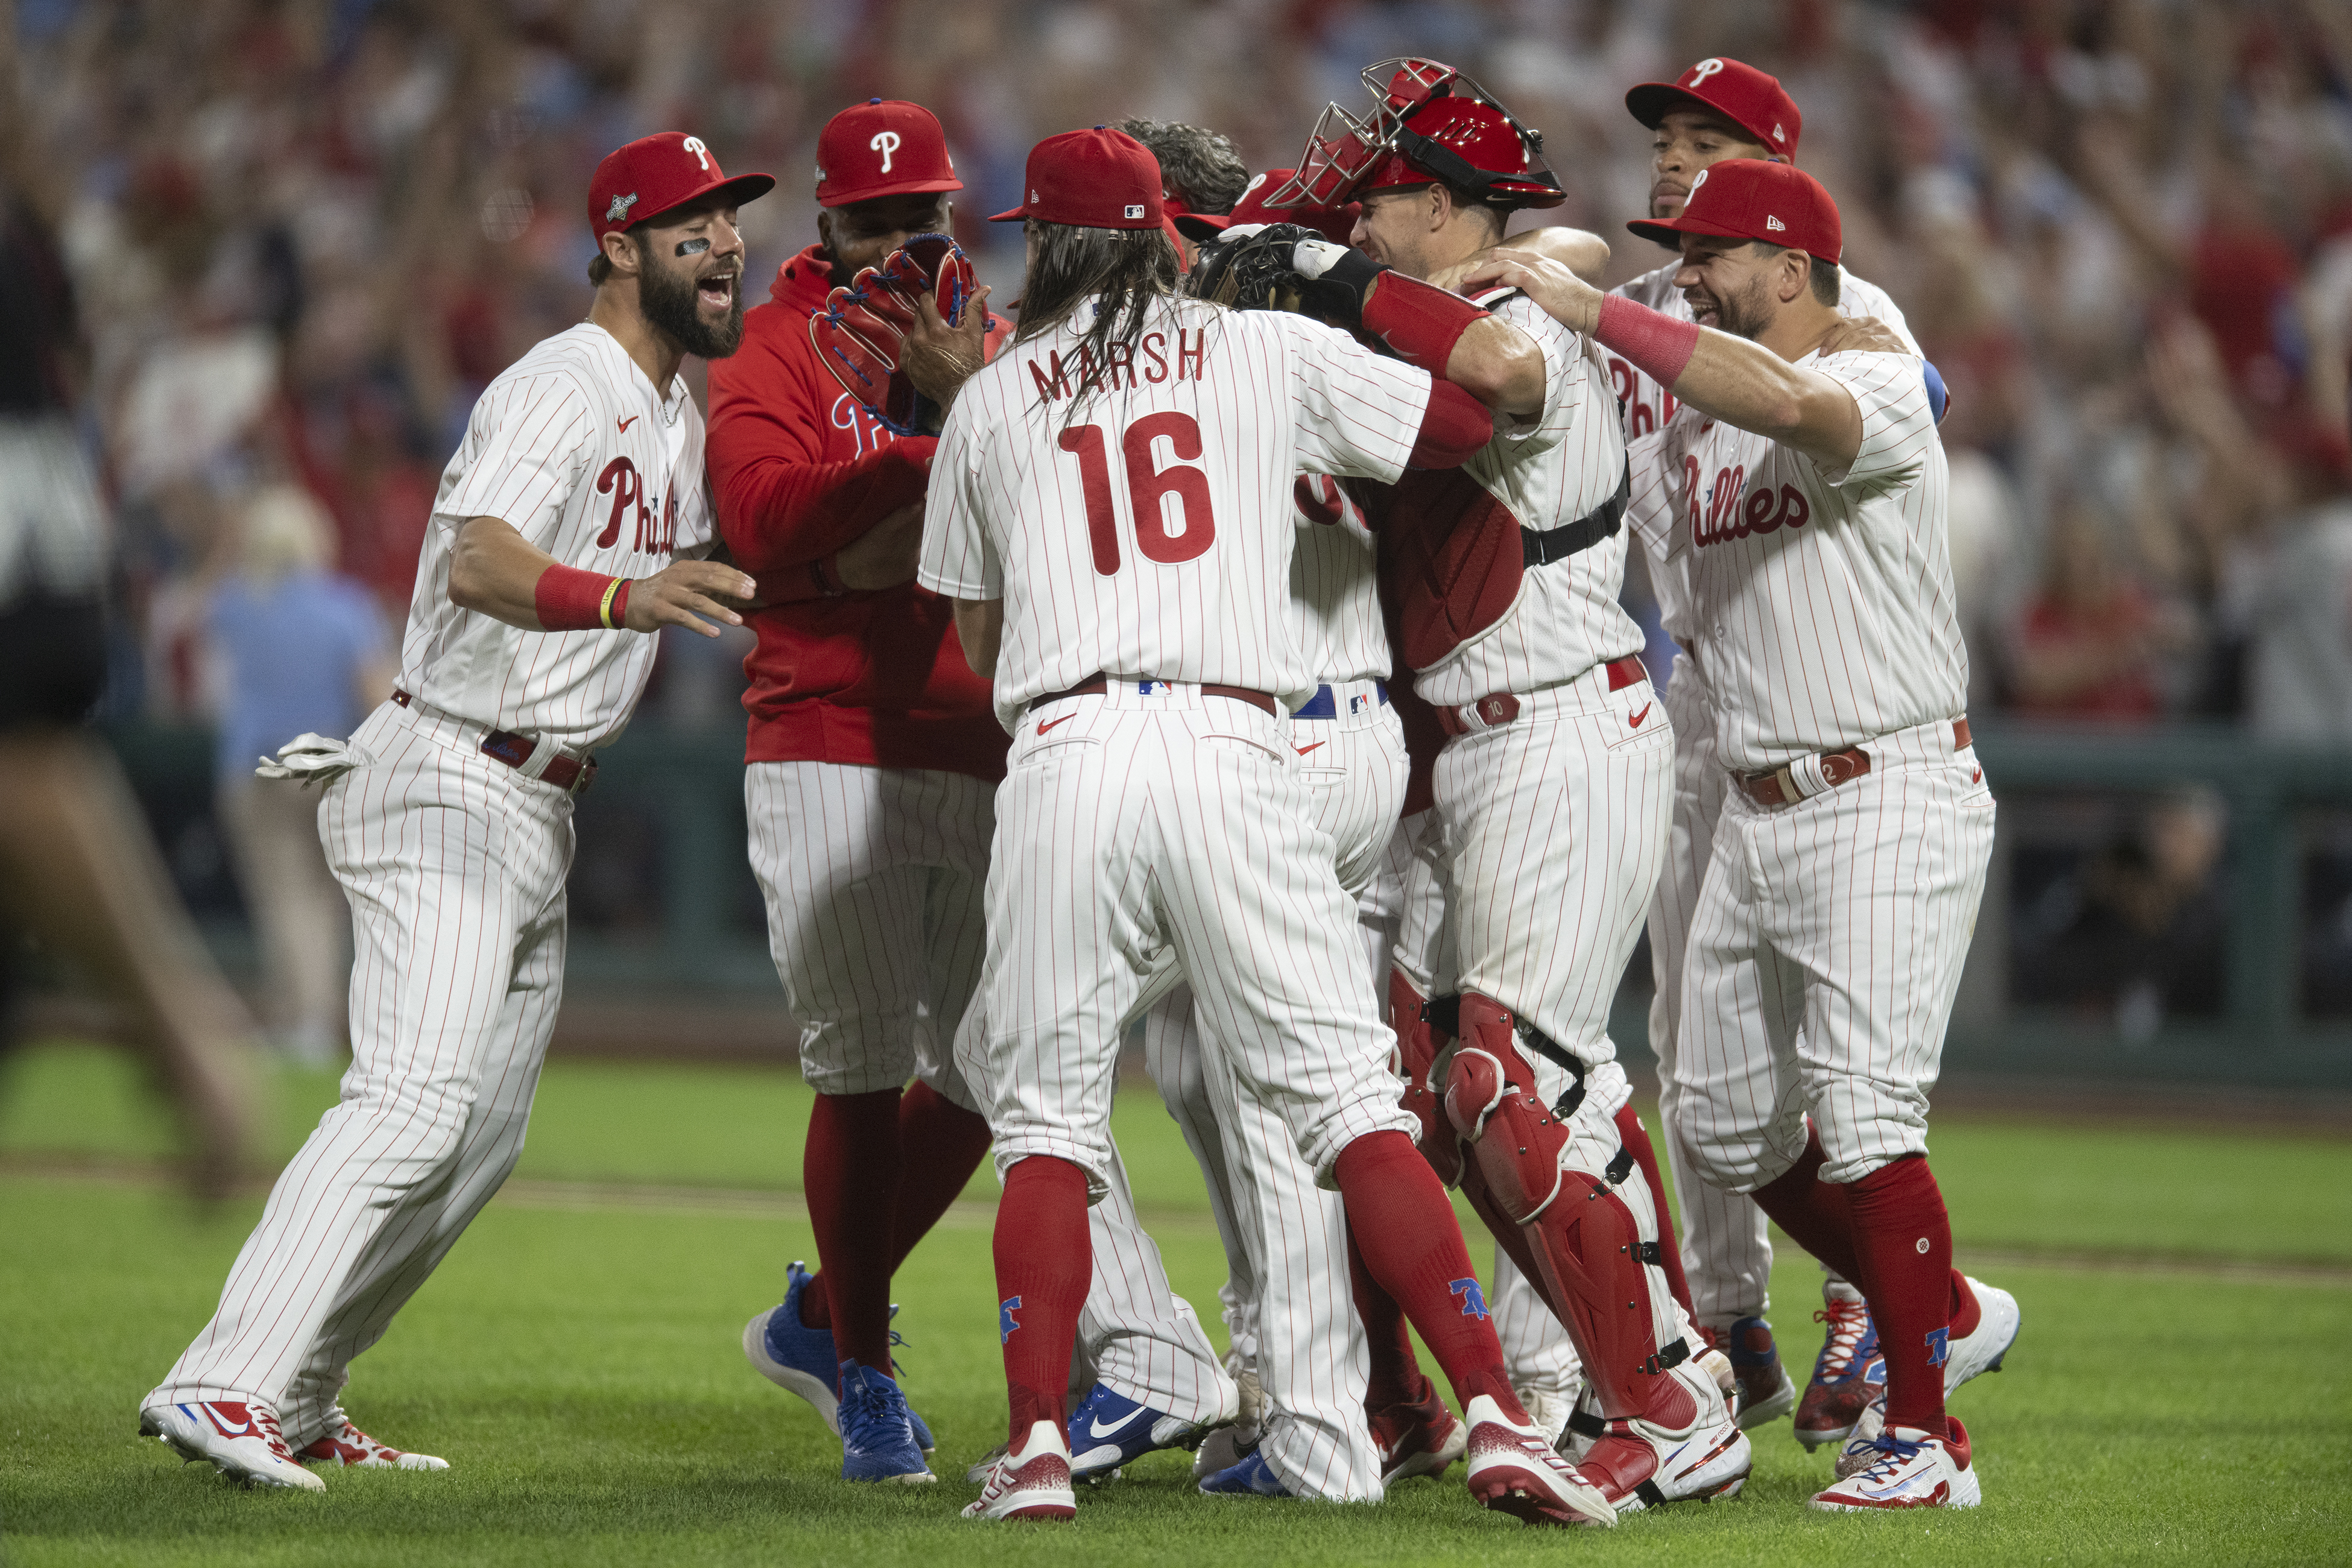 Philadelphia Phillies - The team celebrating winning today's game. They are  wearing white Phillies uniforms and hugging Bryson Stott.